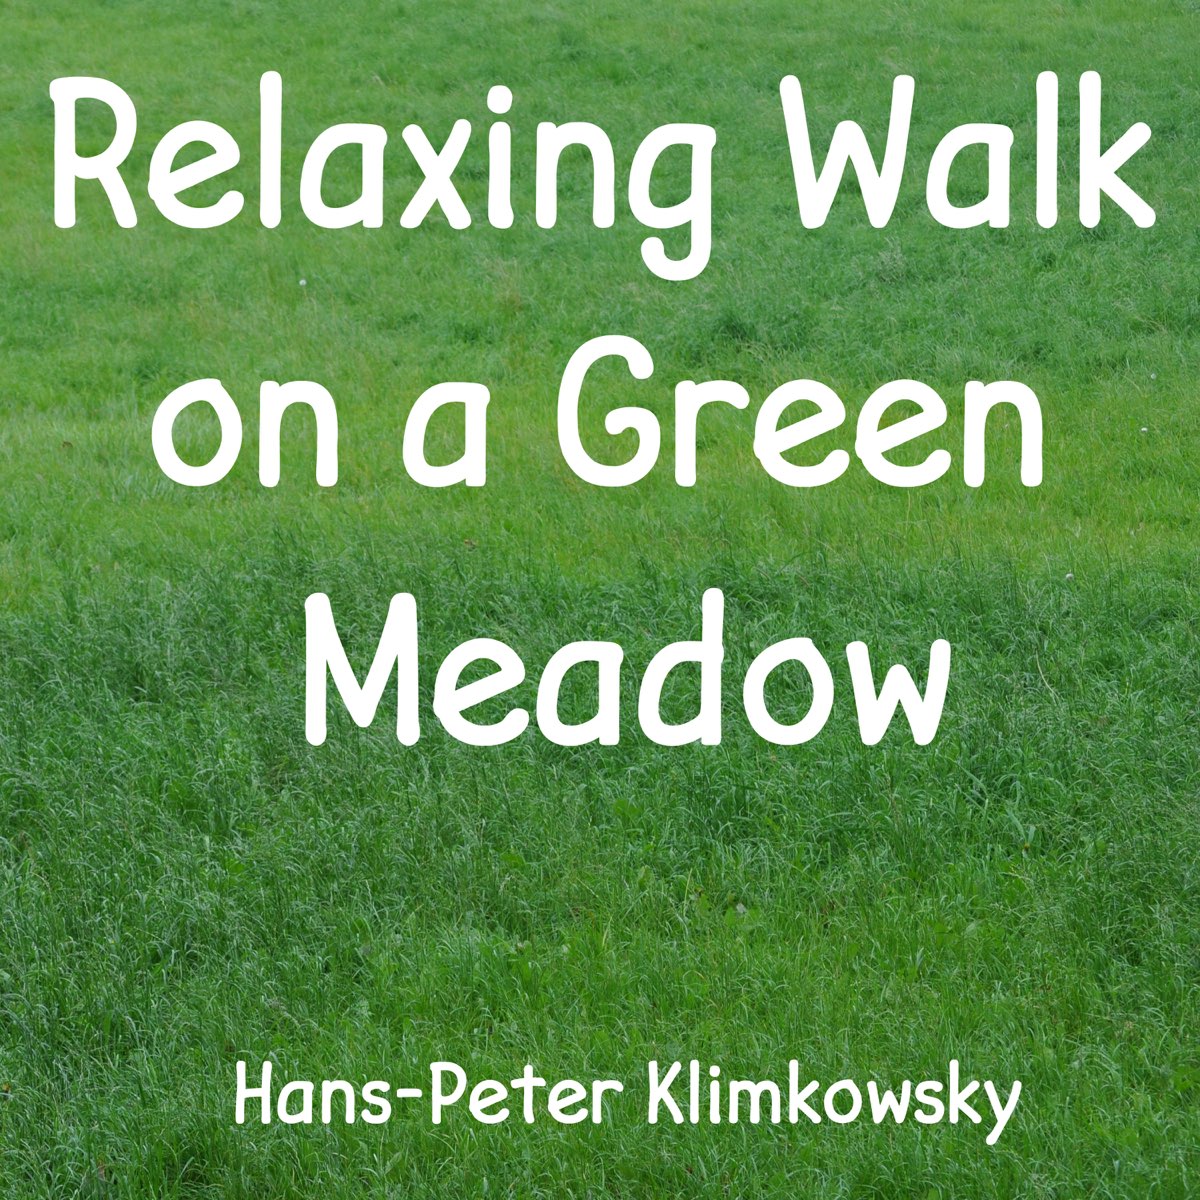 Relaxing walks. Relaxing on a beautiful morning Reloaded for Piano solo Hans-Peter Klimkowsky. Relaxing on a Rainy Day in Spring, pt. 1 От Hans-Peter Klimkowsky Ноты для фортепиано.